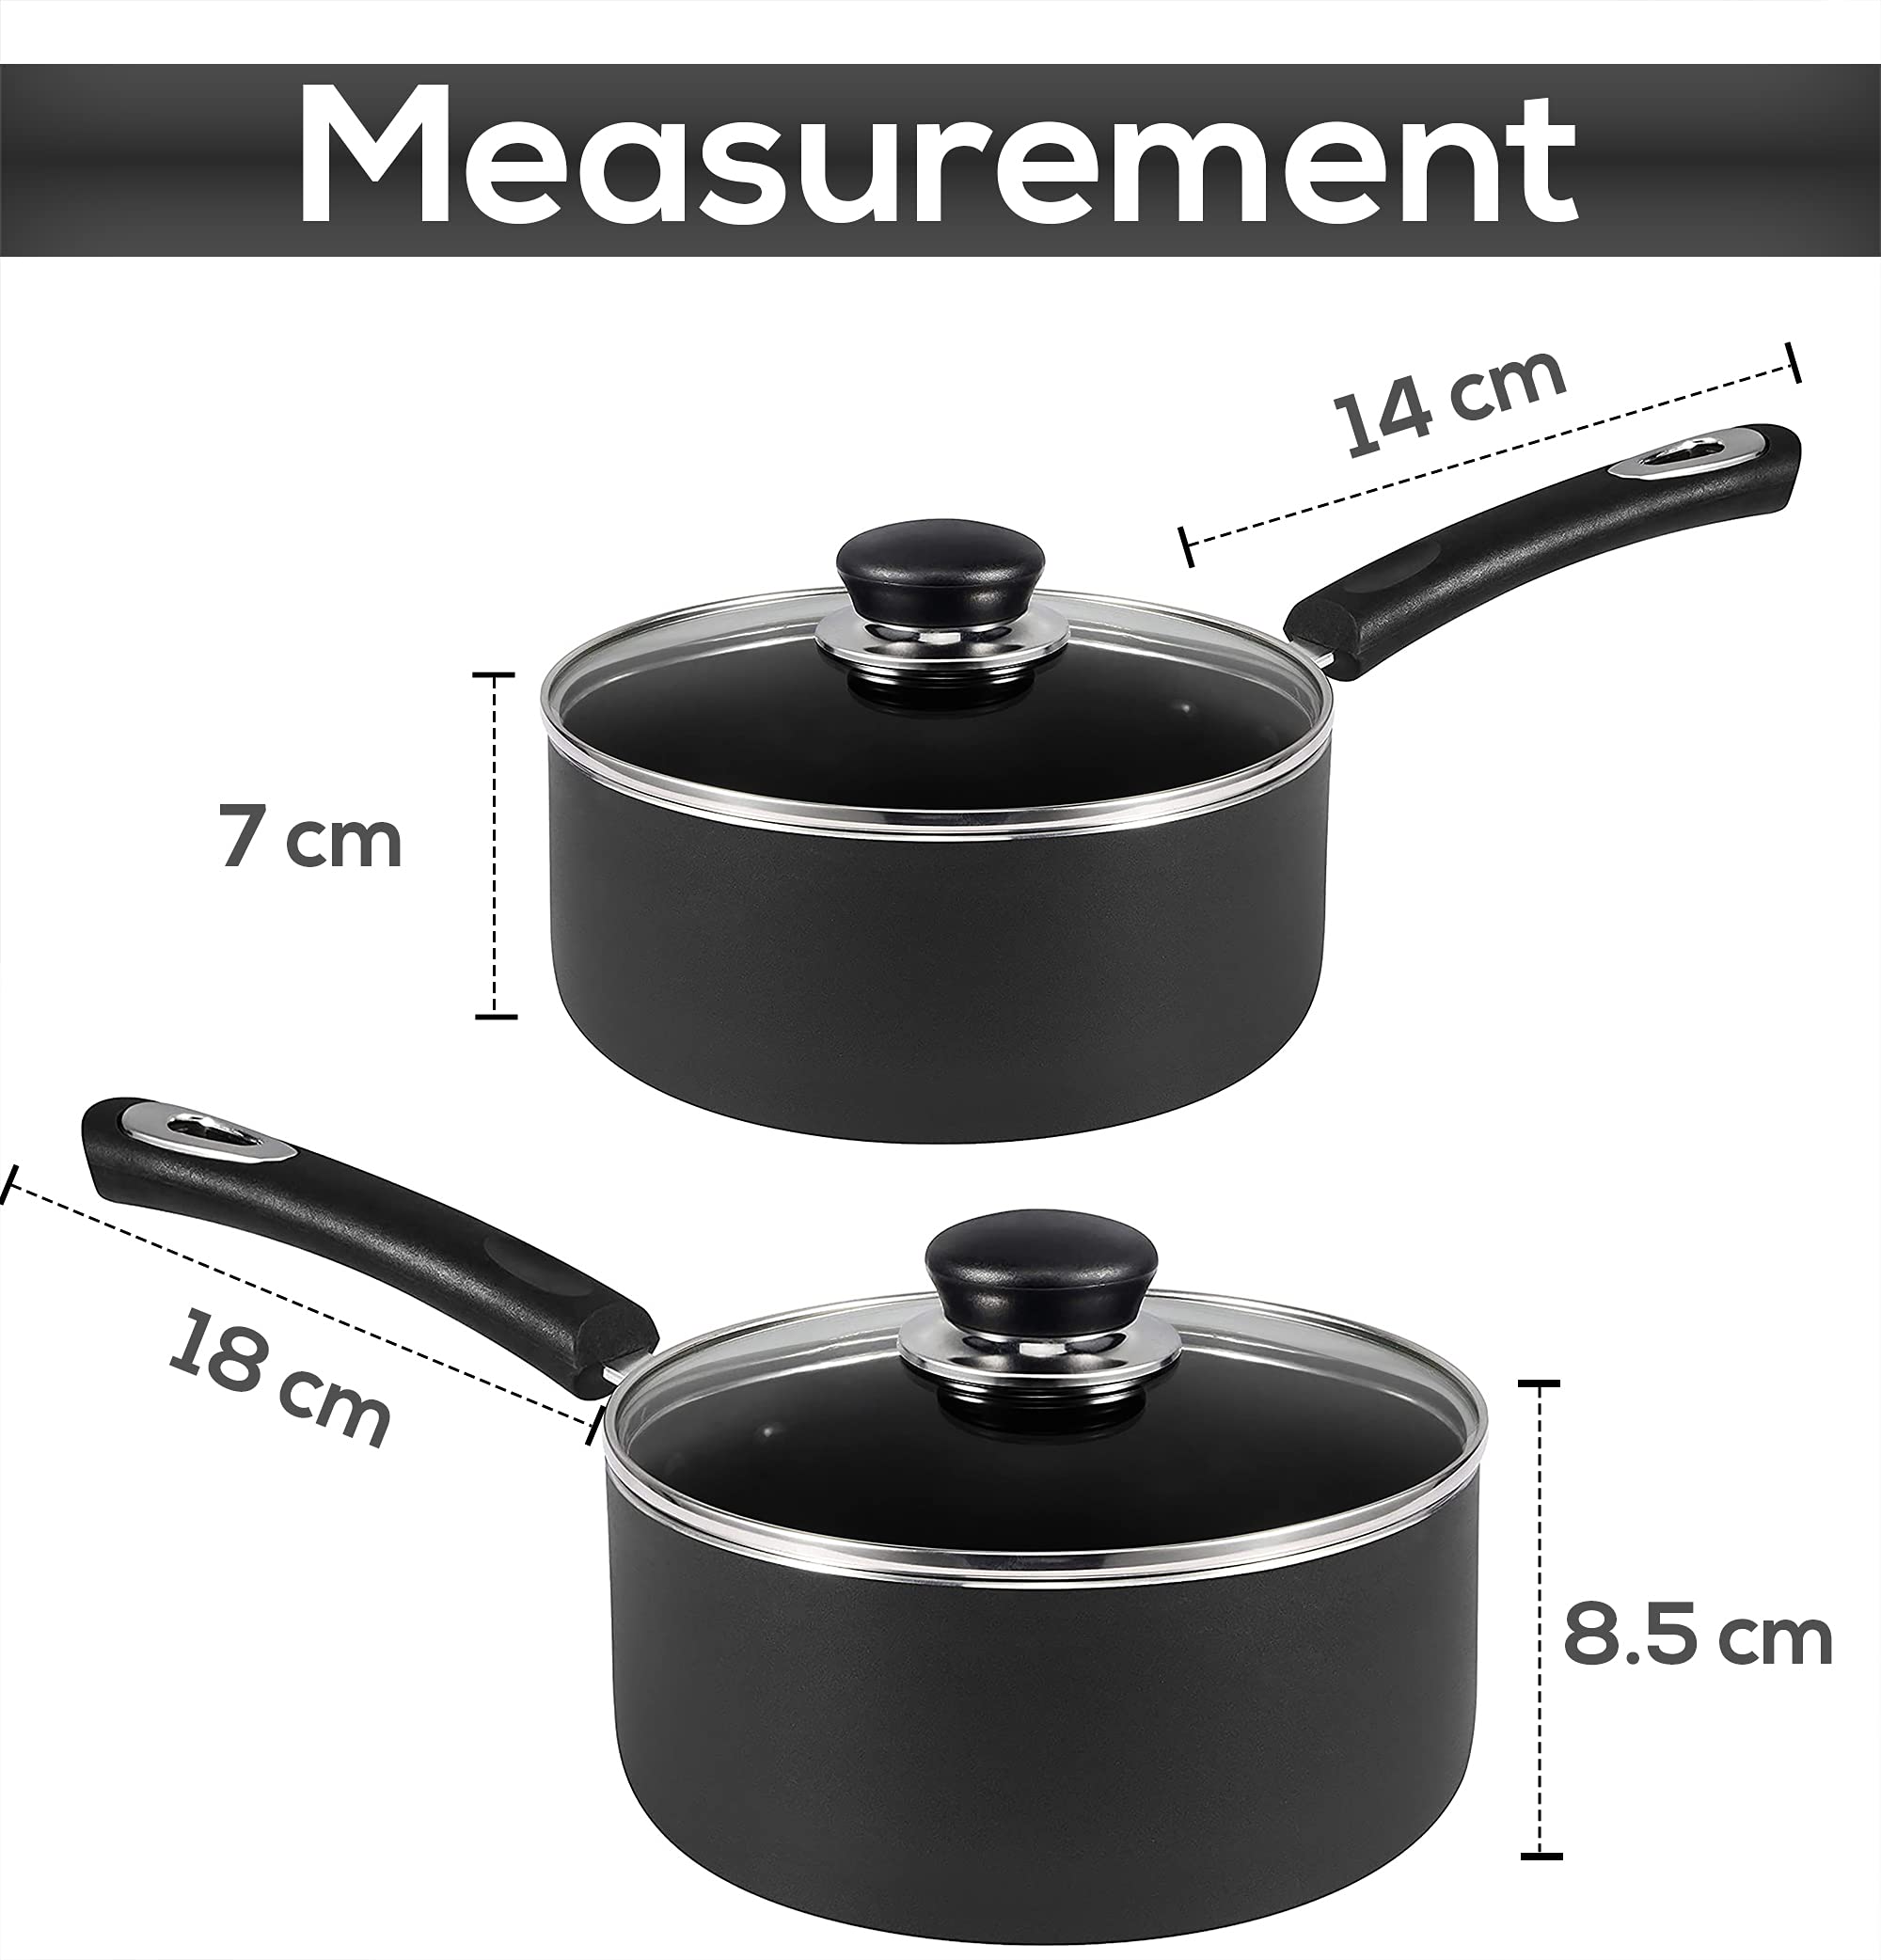 Utopia Kitchen 1 Quart & 2 Quart Nonstick Saucepans with Glass Lids & along with 8” 9” & 11” Nonstick Frying Pan - Induction Bottom - Multipurpose Use for Home Kitchen or Restaurant - Grey-Black